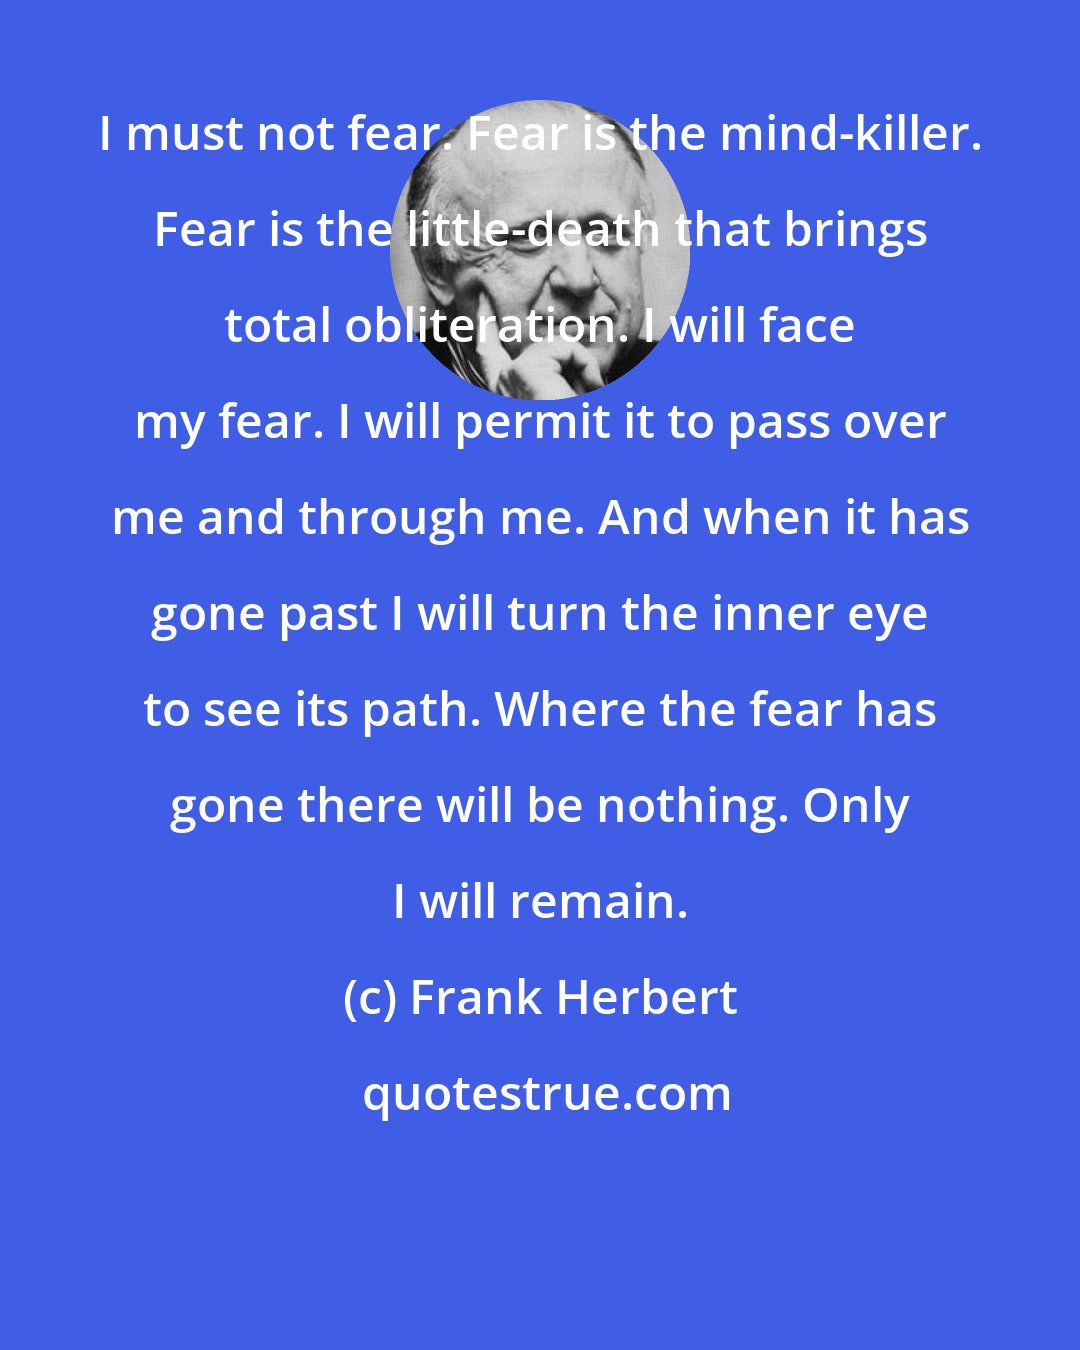 Frank Herbert: I must not fear. Fear is the mind-killer. Fear is the little-death that brings total obliteration. I will face my fear. I will permit it to pass over me and through me. And when it has gone past I will turn the inner eye to see its path. Where the fear has gone there will be nothing. Only I will remain.